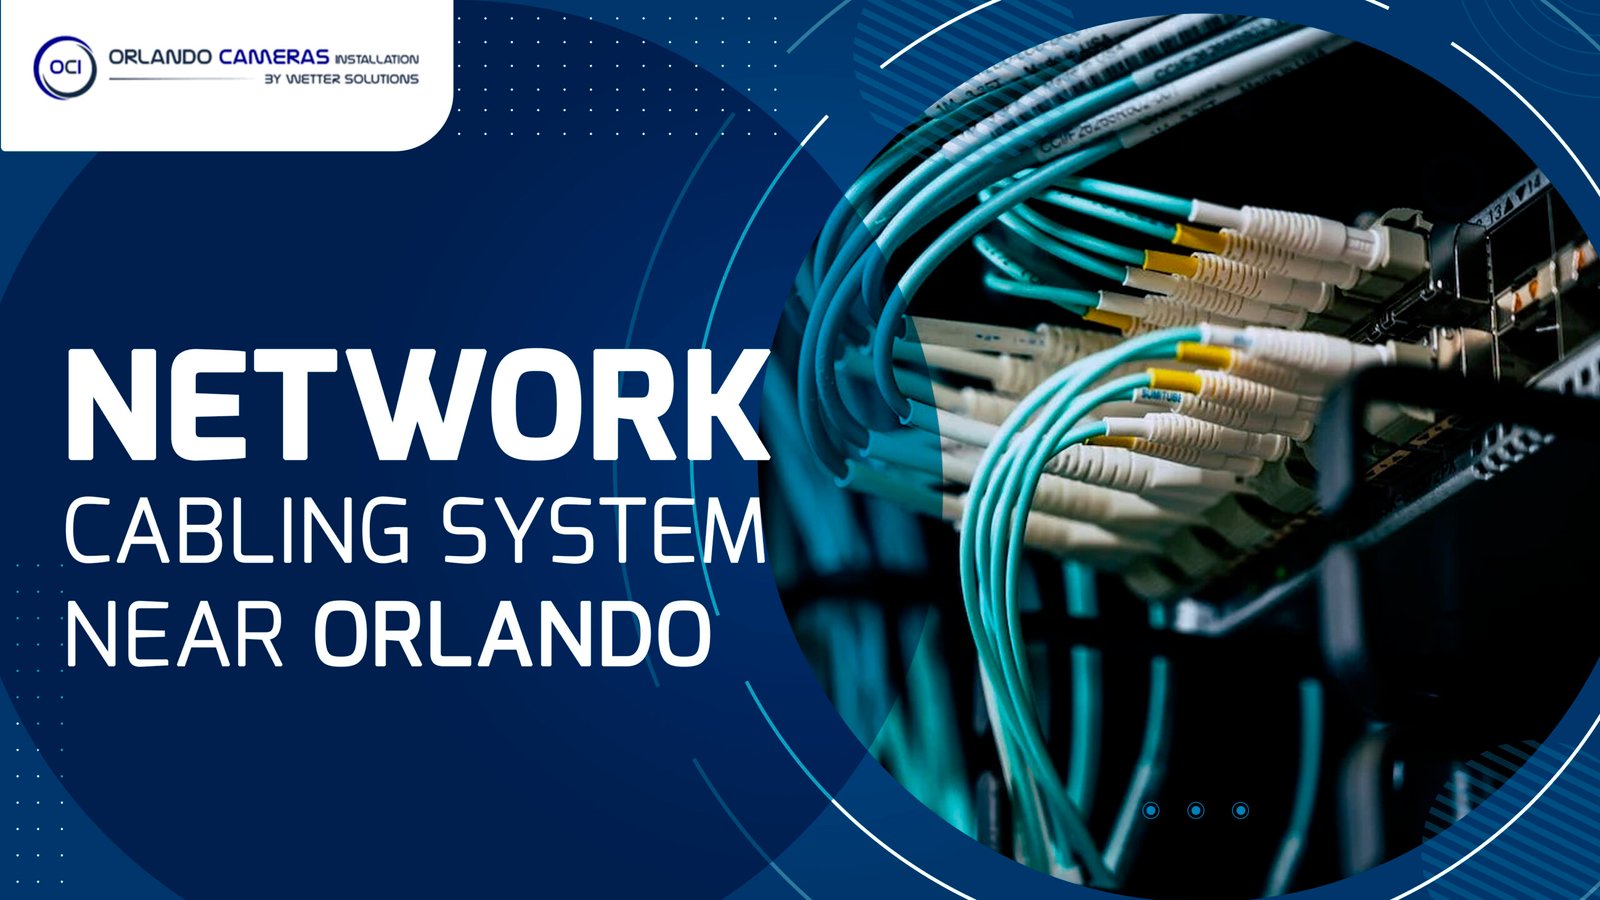 Network cabling system near Orlando